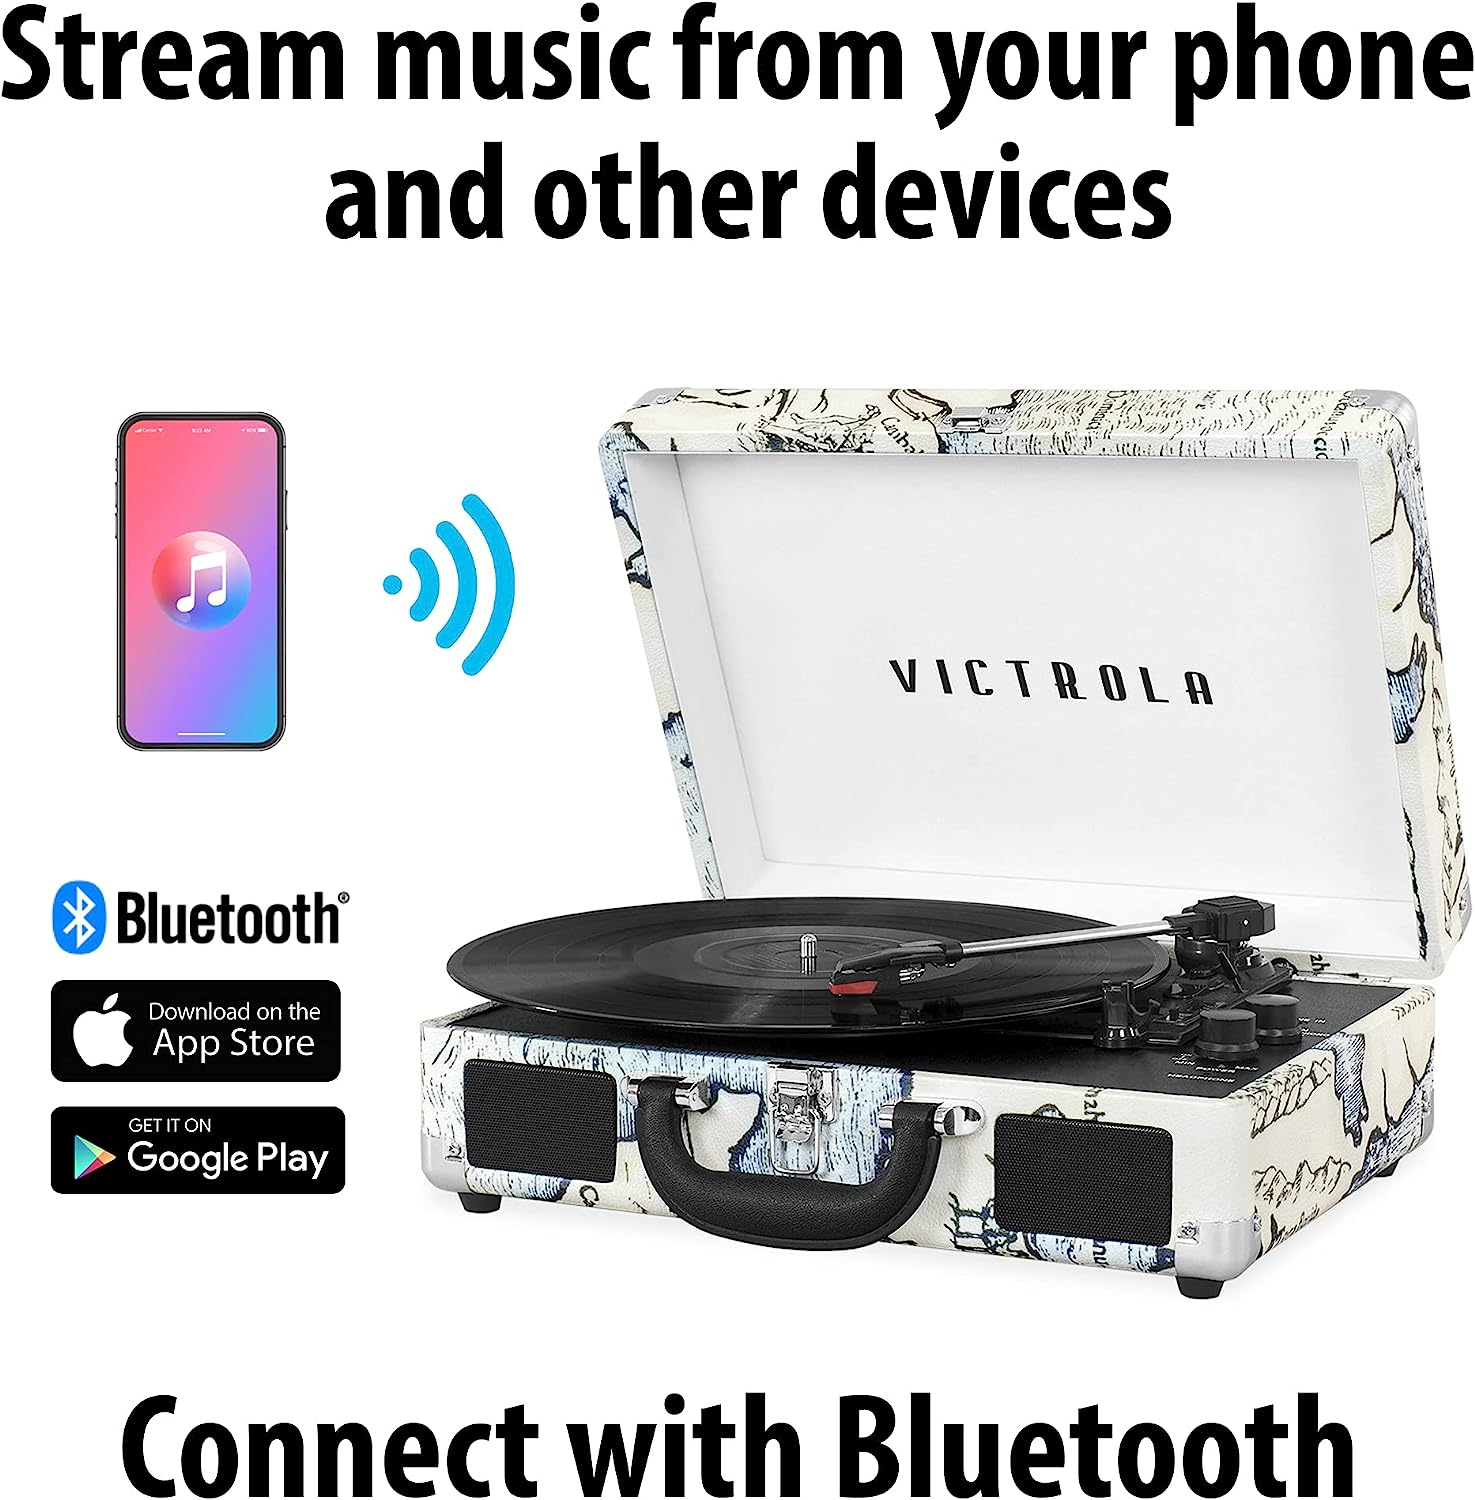 Victrola Vintage 3-Speed Bluetooth Portable Suitcase Report Player with Built-in Speakers | Upgraded Turntable Audio Sound| Includes Extra Stylus | Black, Template Number: VSC-550BT-BK, 1SFA